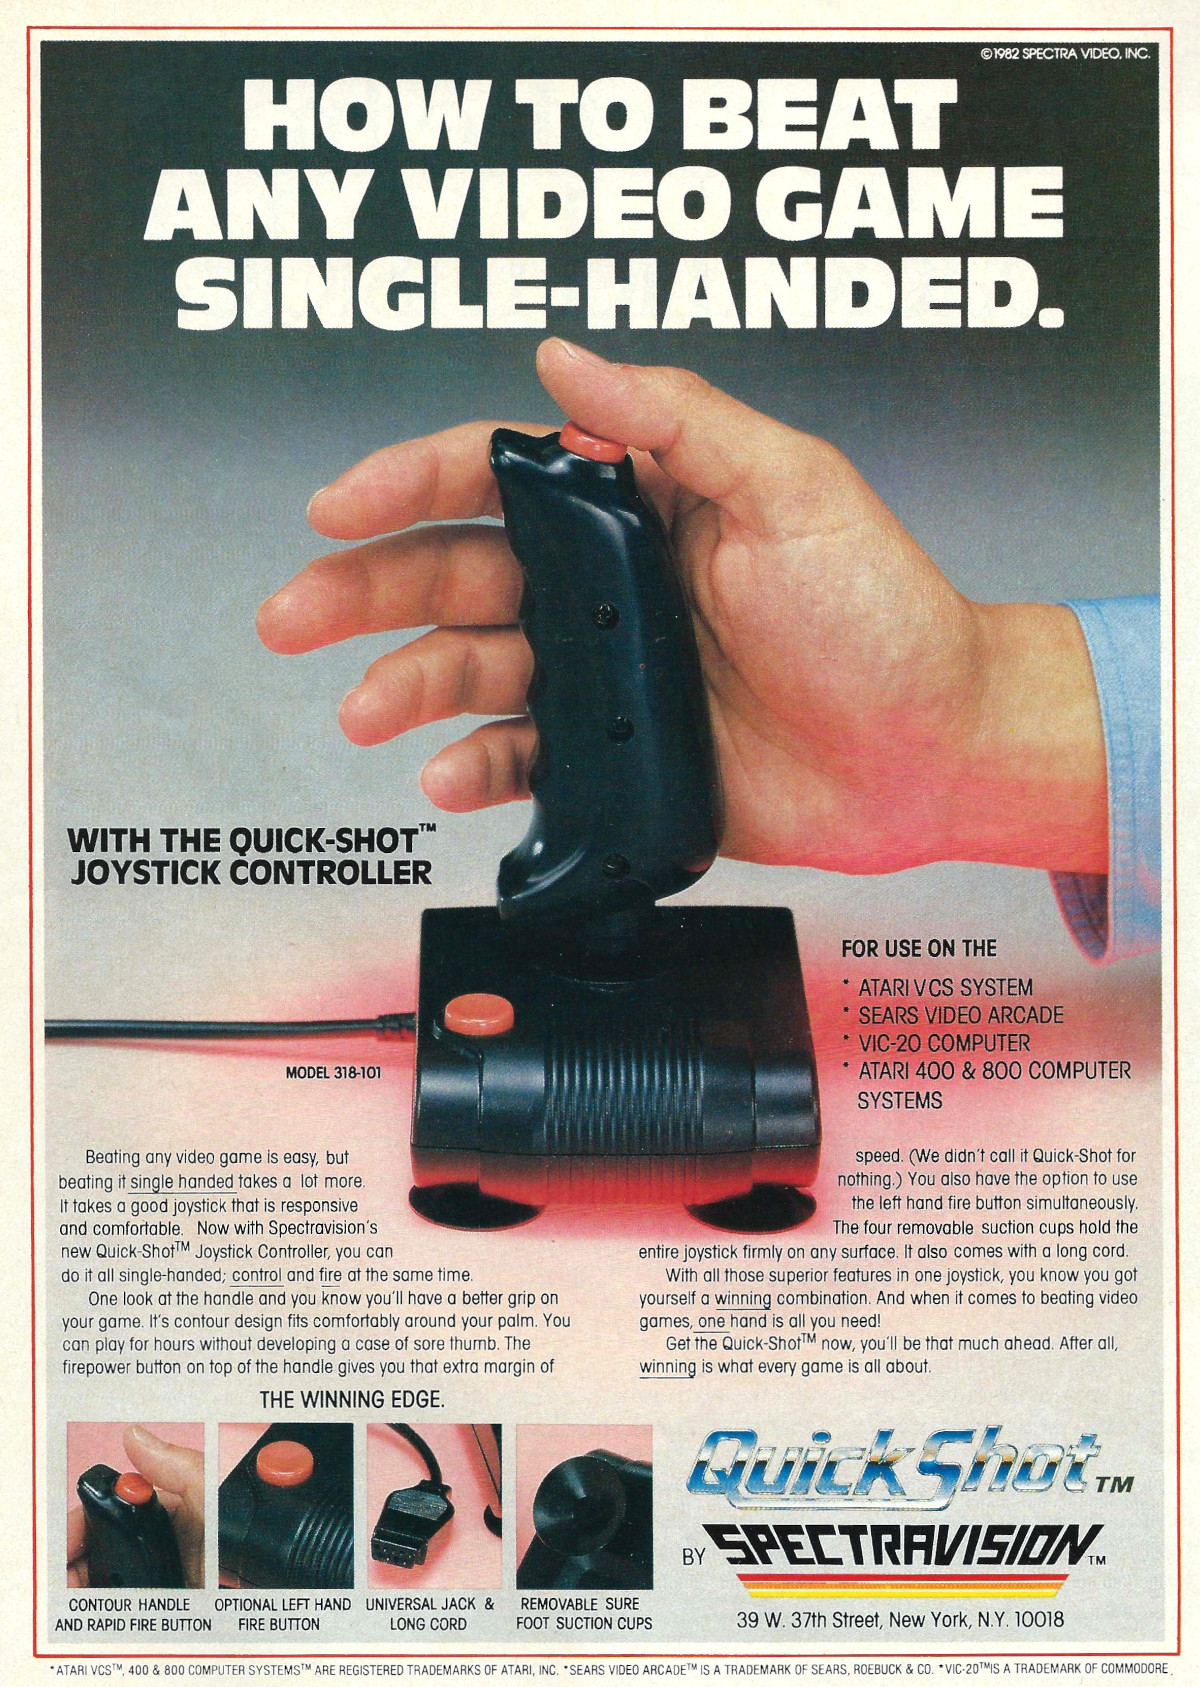 The legendary QuickShot joystick, compatible with the VIC-20 as well as the Atari 2600. From Creative Computing, August 1982